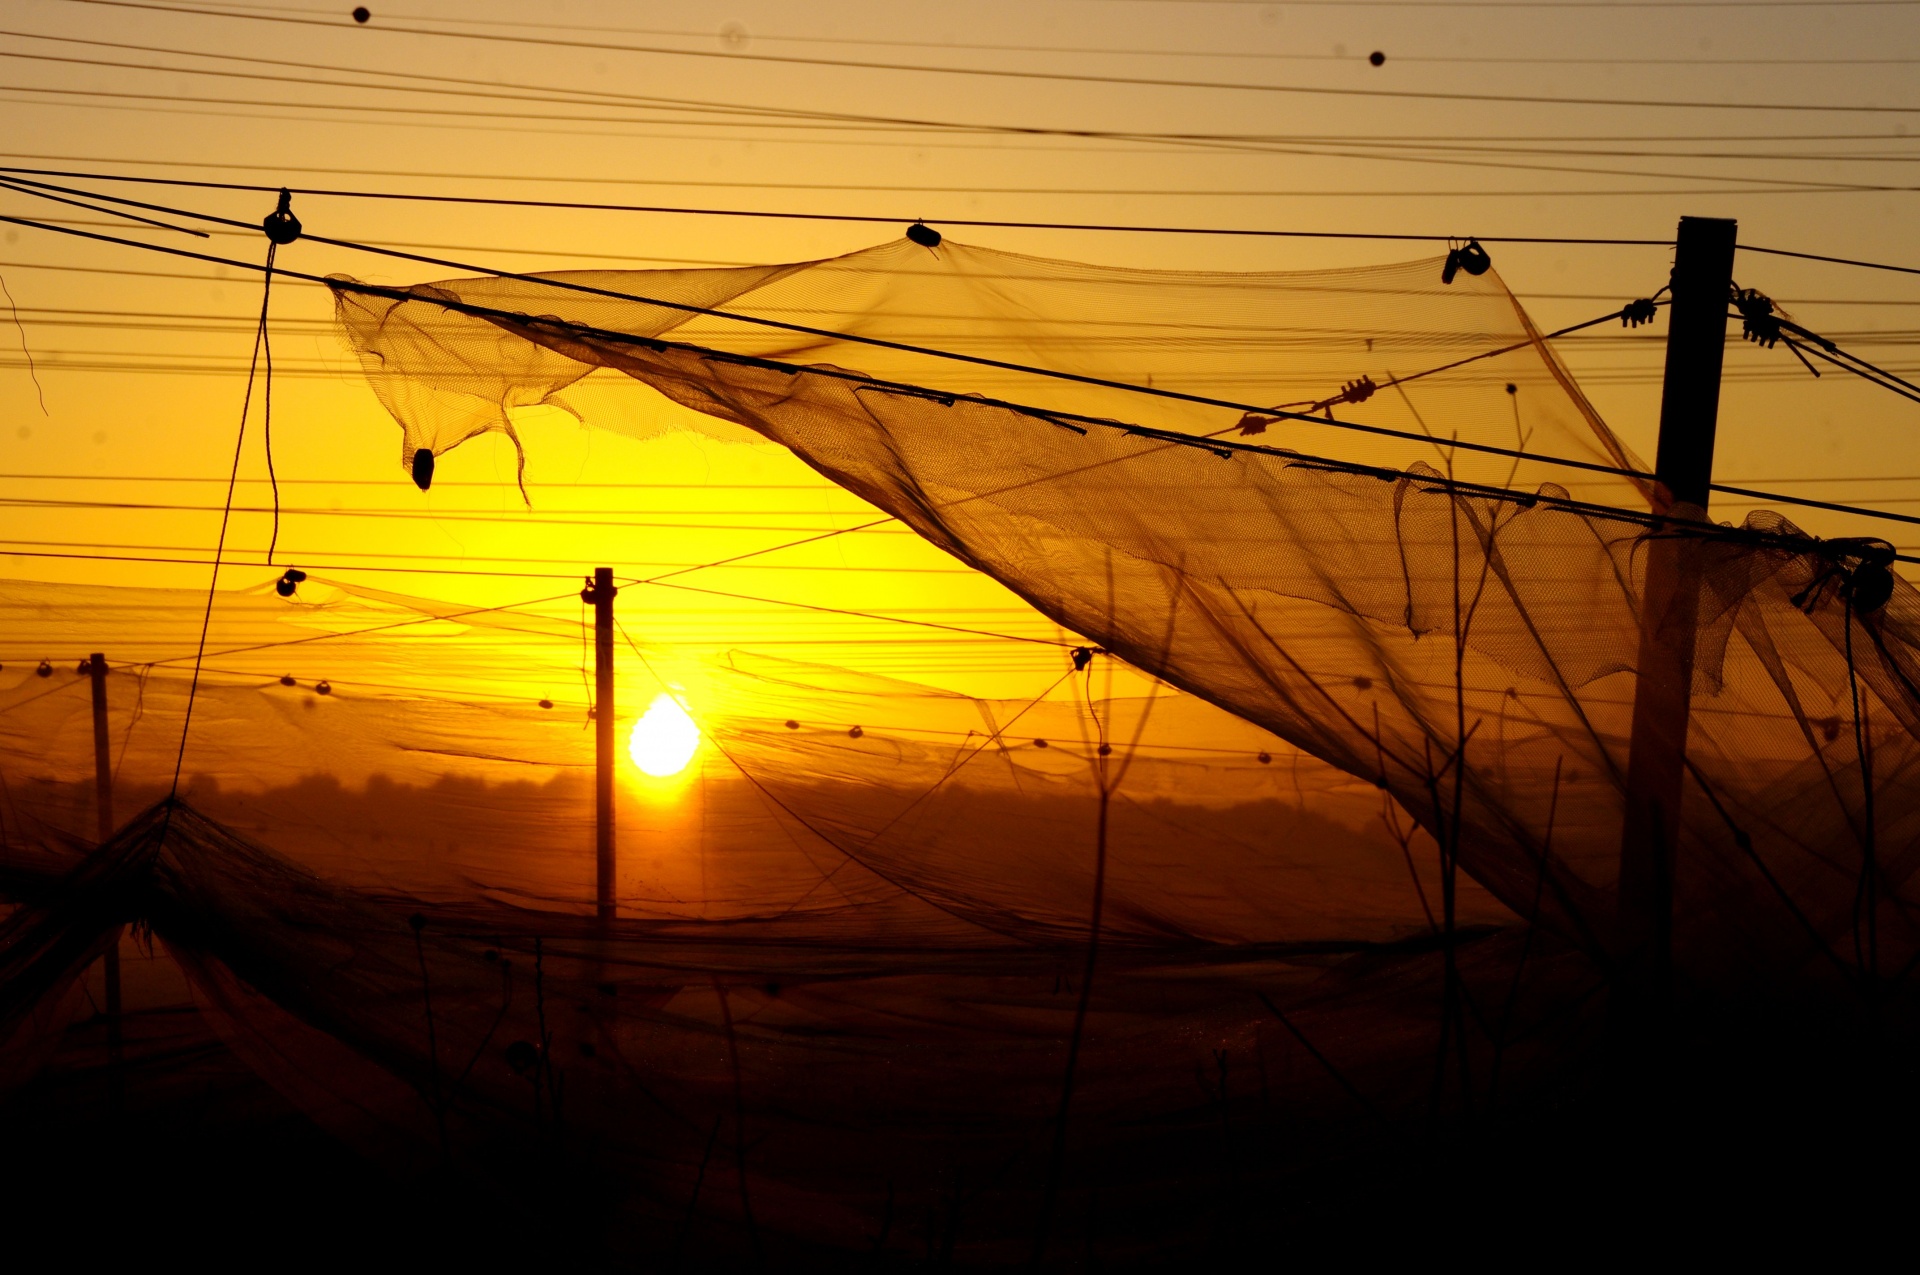 Orchard Nets At Sunrise Golden Hour